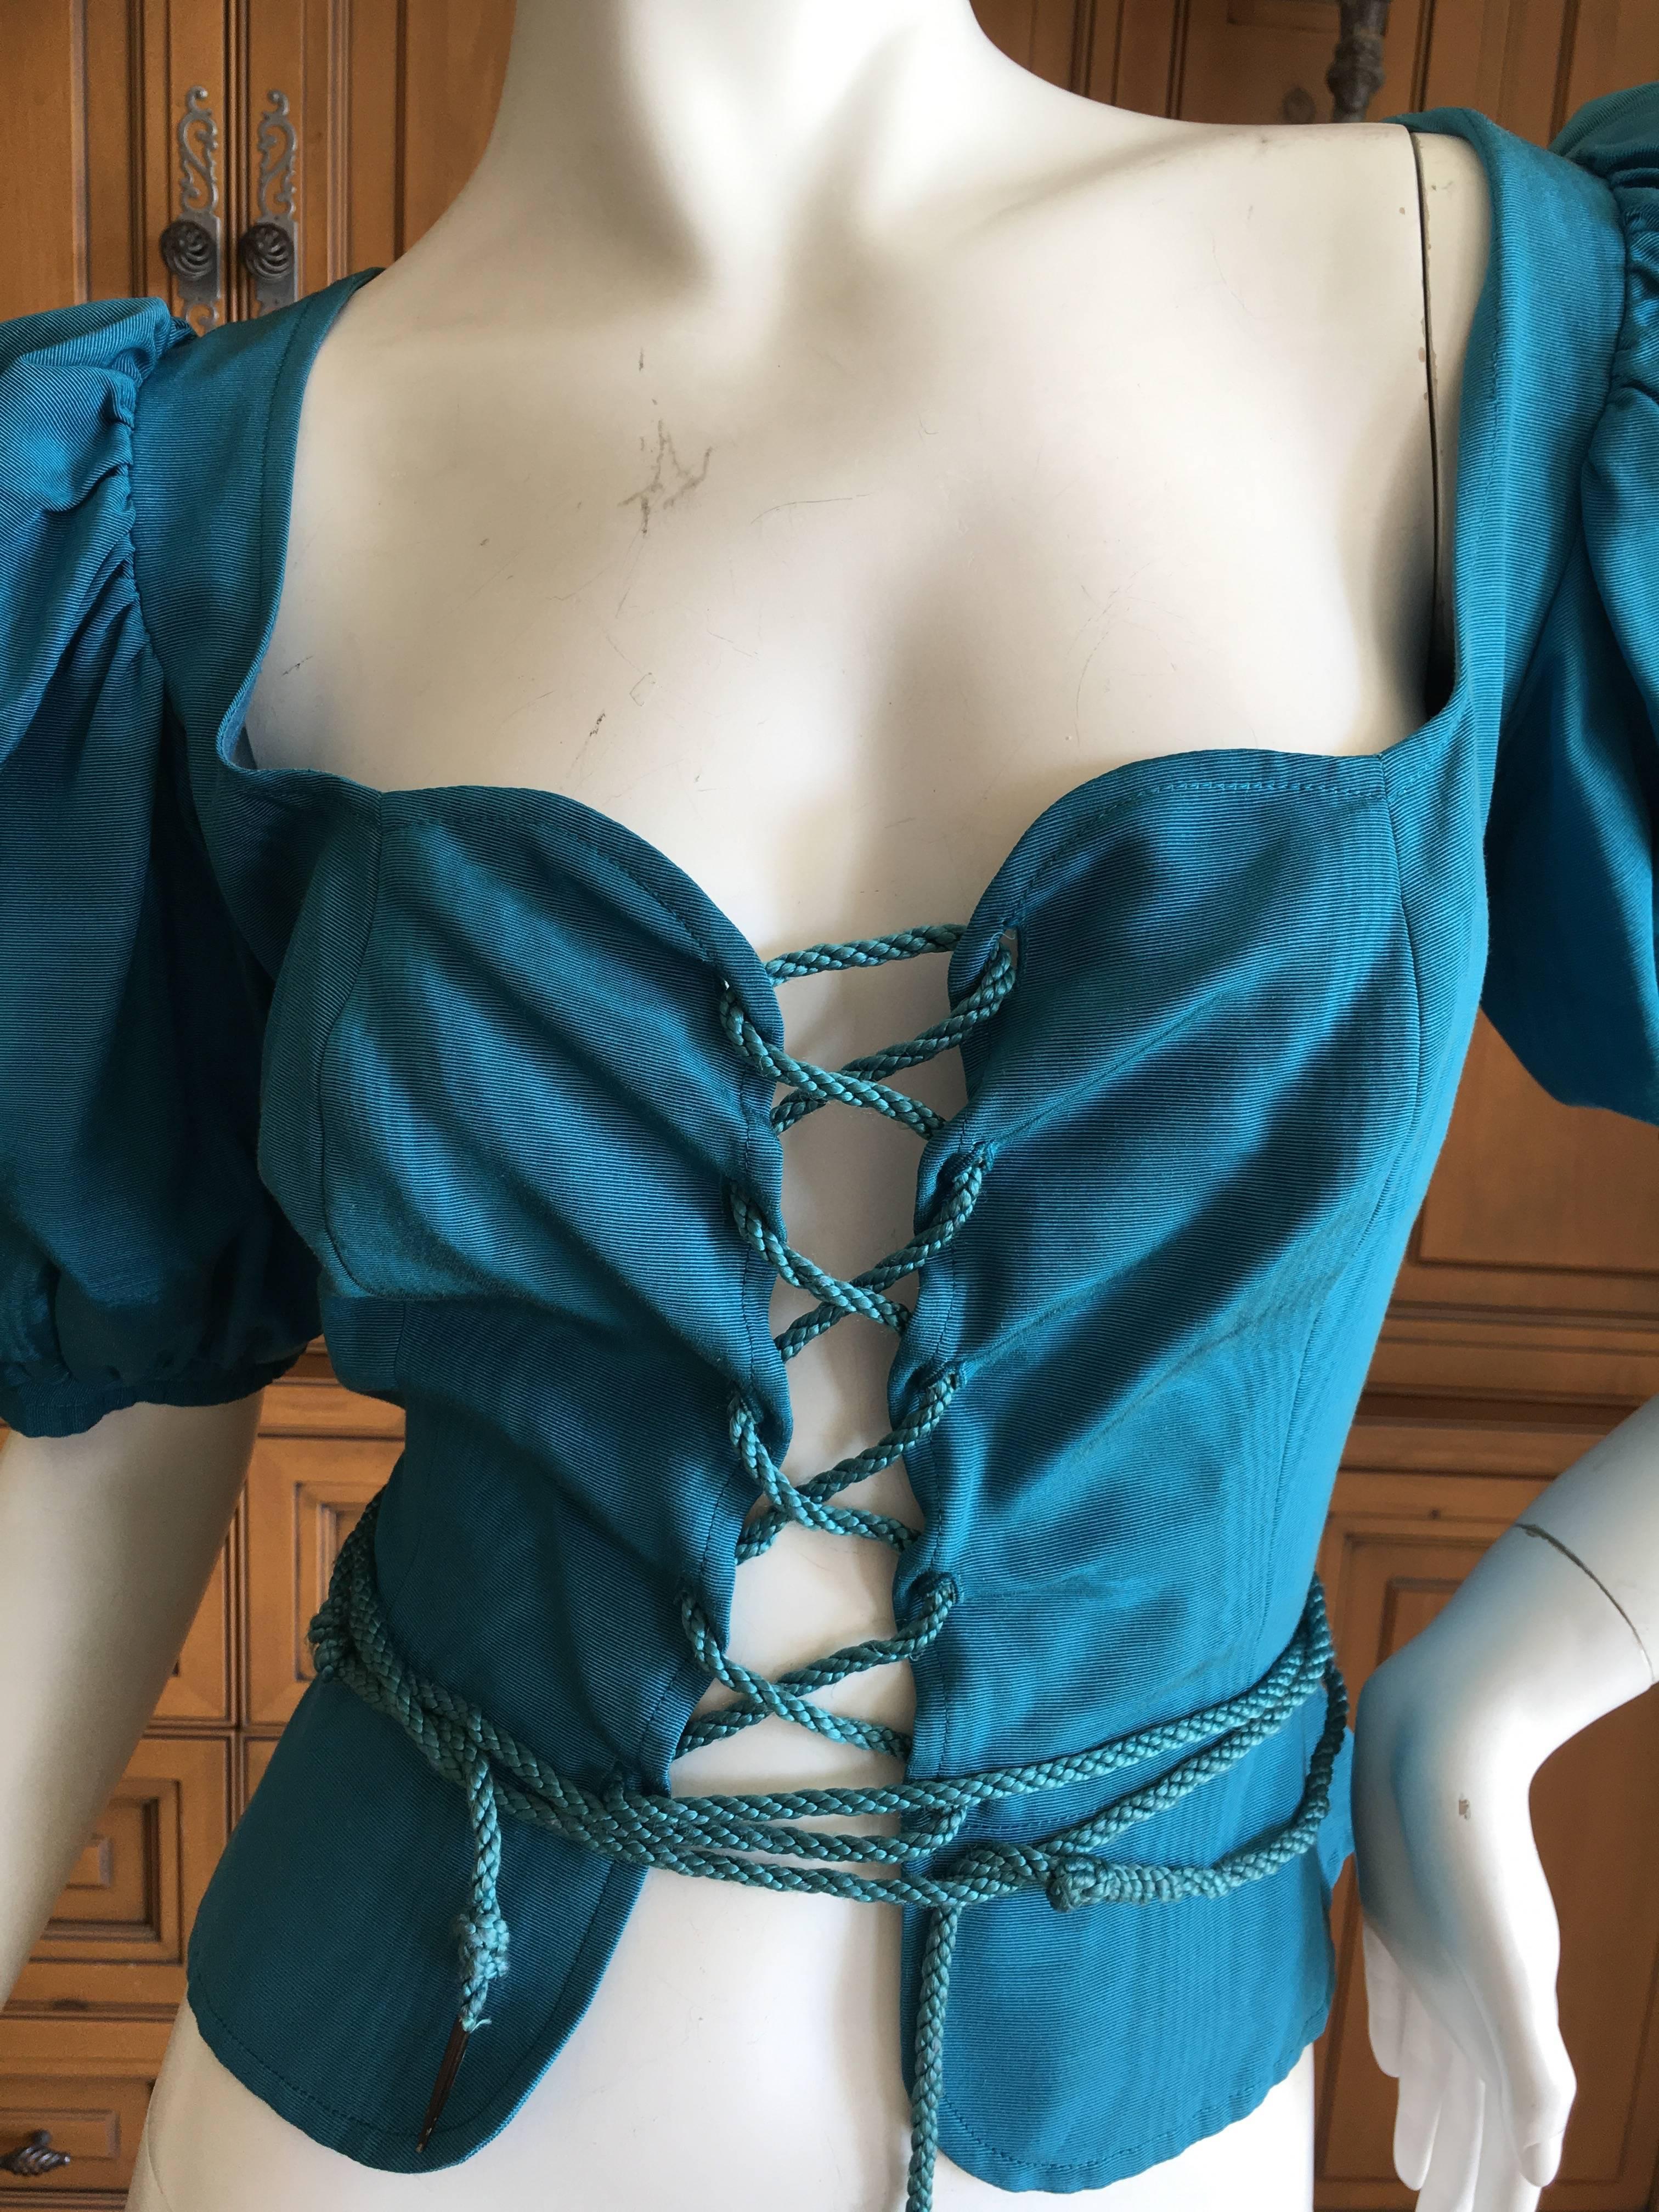 Yves Saint Laurent Rive Gauche 1970's Turquoise Silk Moire Corset Lace Top.
The original version of the corset lace peasant blouse that Yves Saint Laurent revisited throughout his career and has been interpreted for YSL by Tom Ford and Stefano